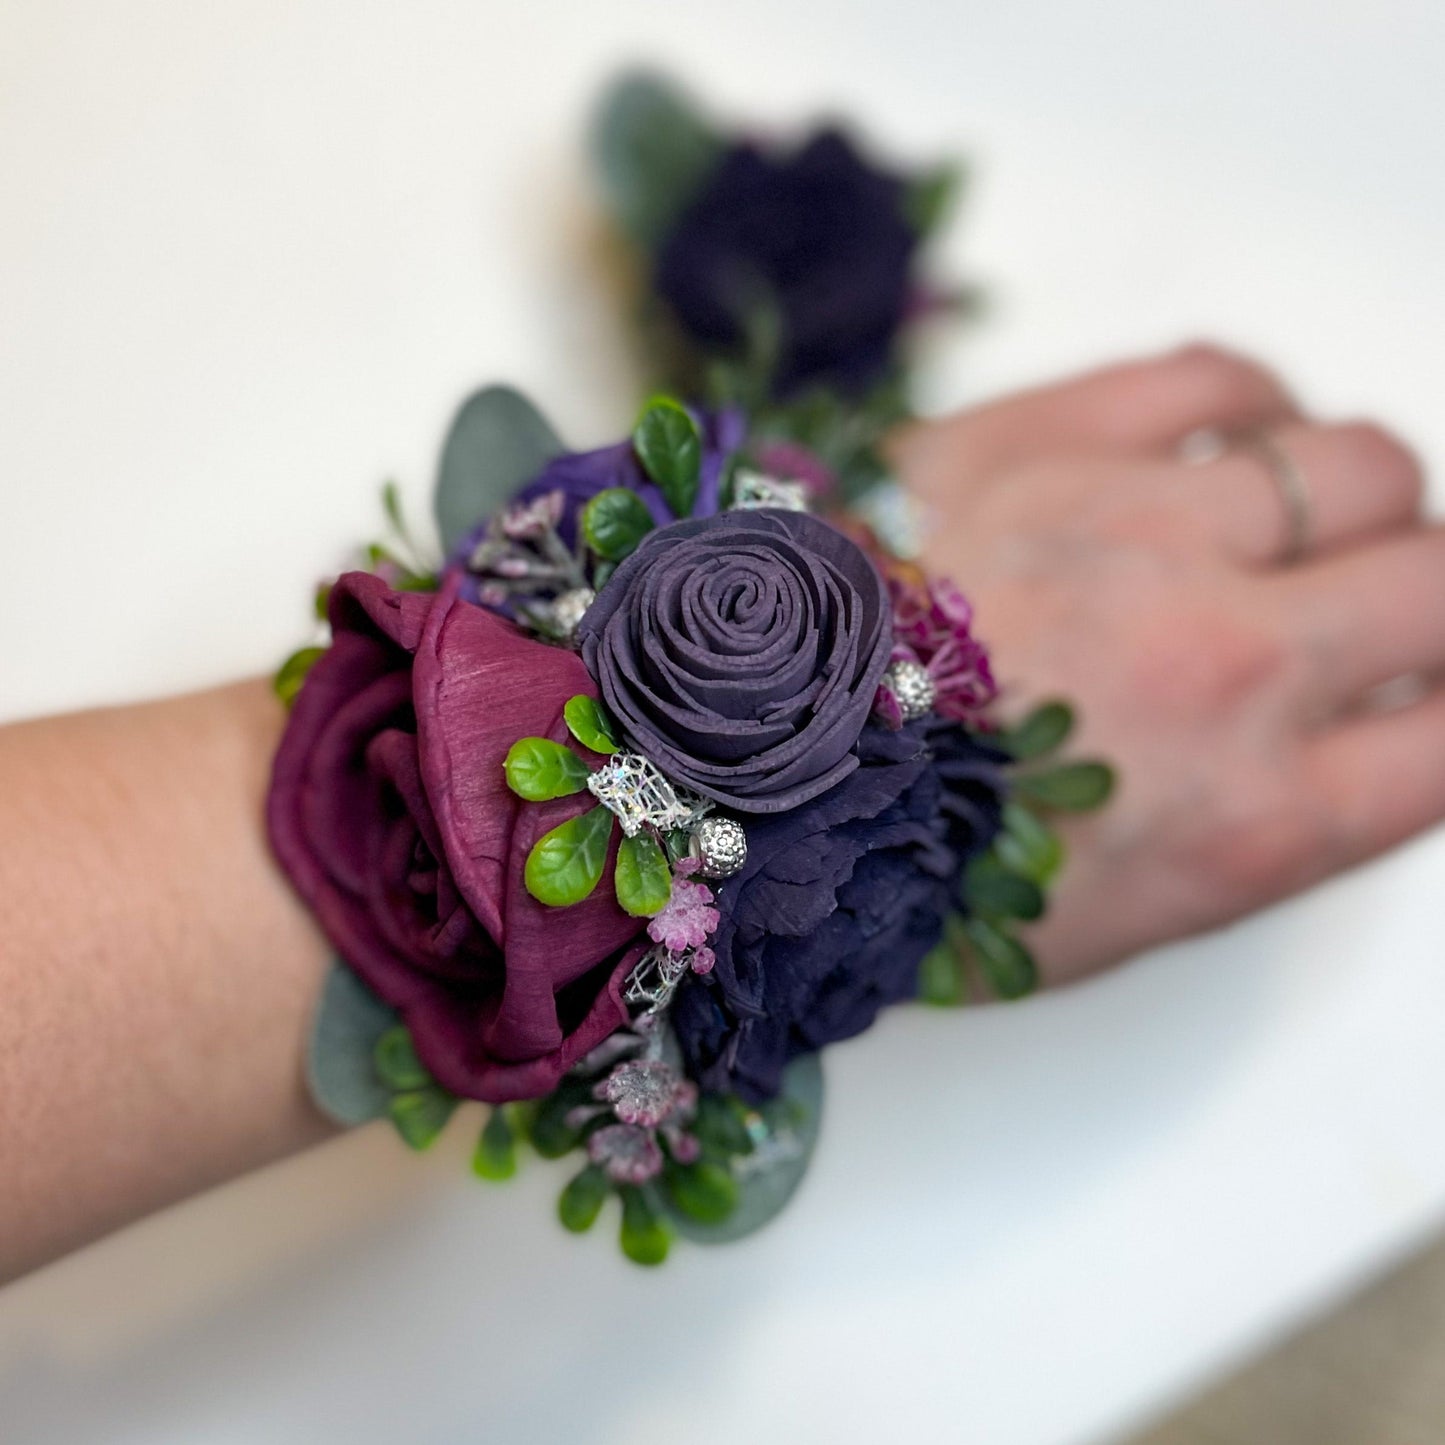 Custom Corsage and Boutonniere Orders